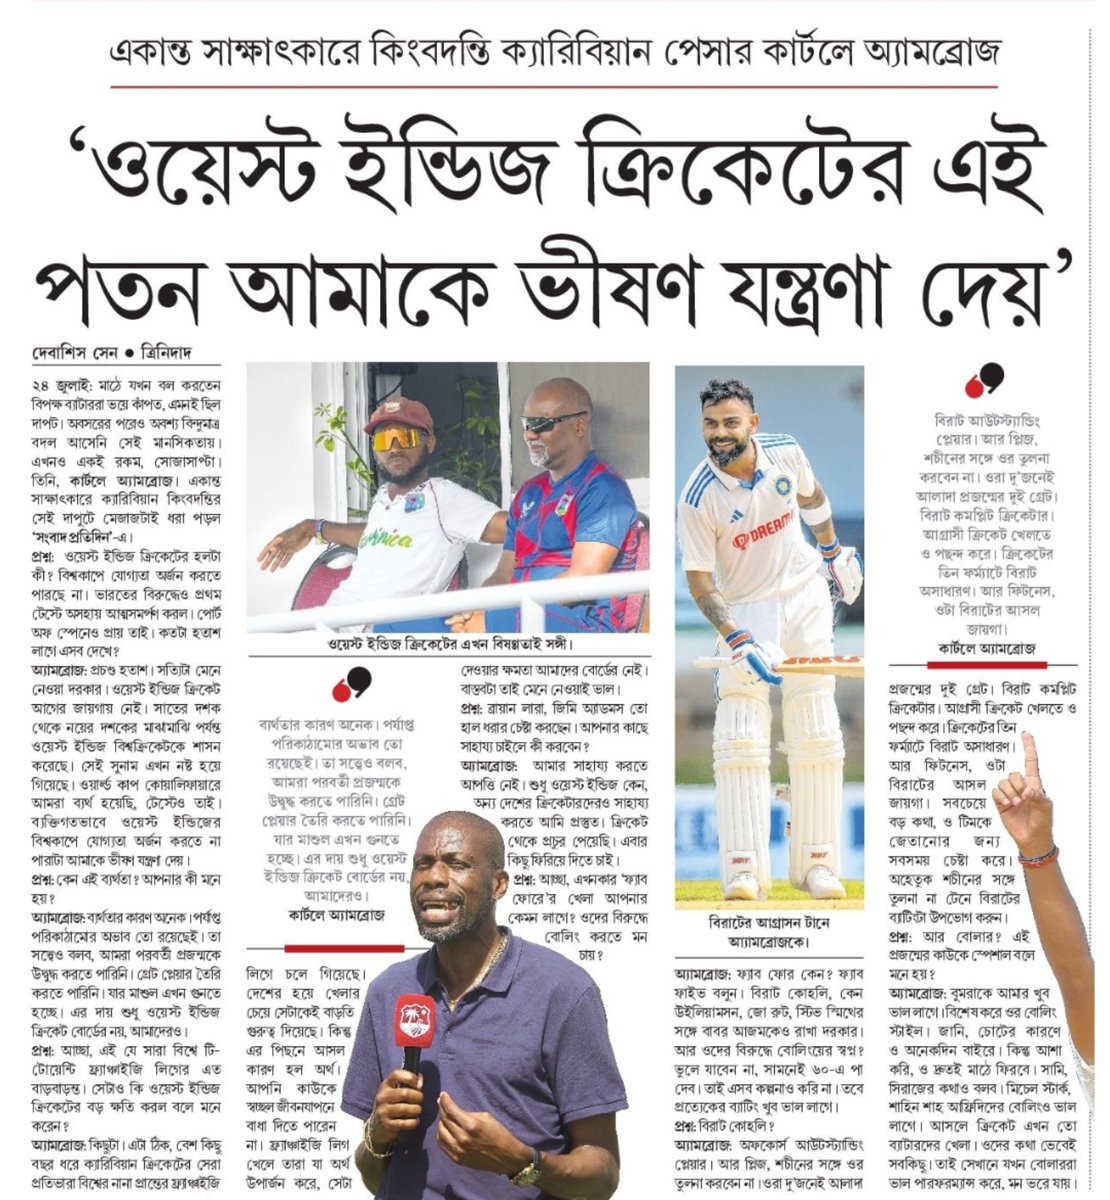 It was great to have a candid chat with Sir Curtly Ambrose.  Thanks very much for the opportunity @bosesrinjoy Tumpaida, @arinjoyb29  @rajarshiganguly 
#WIvsIND